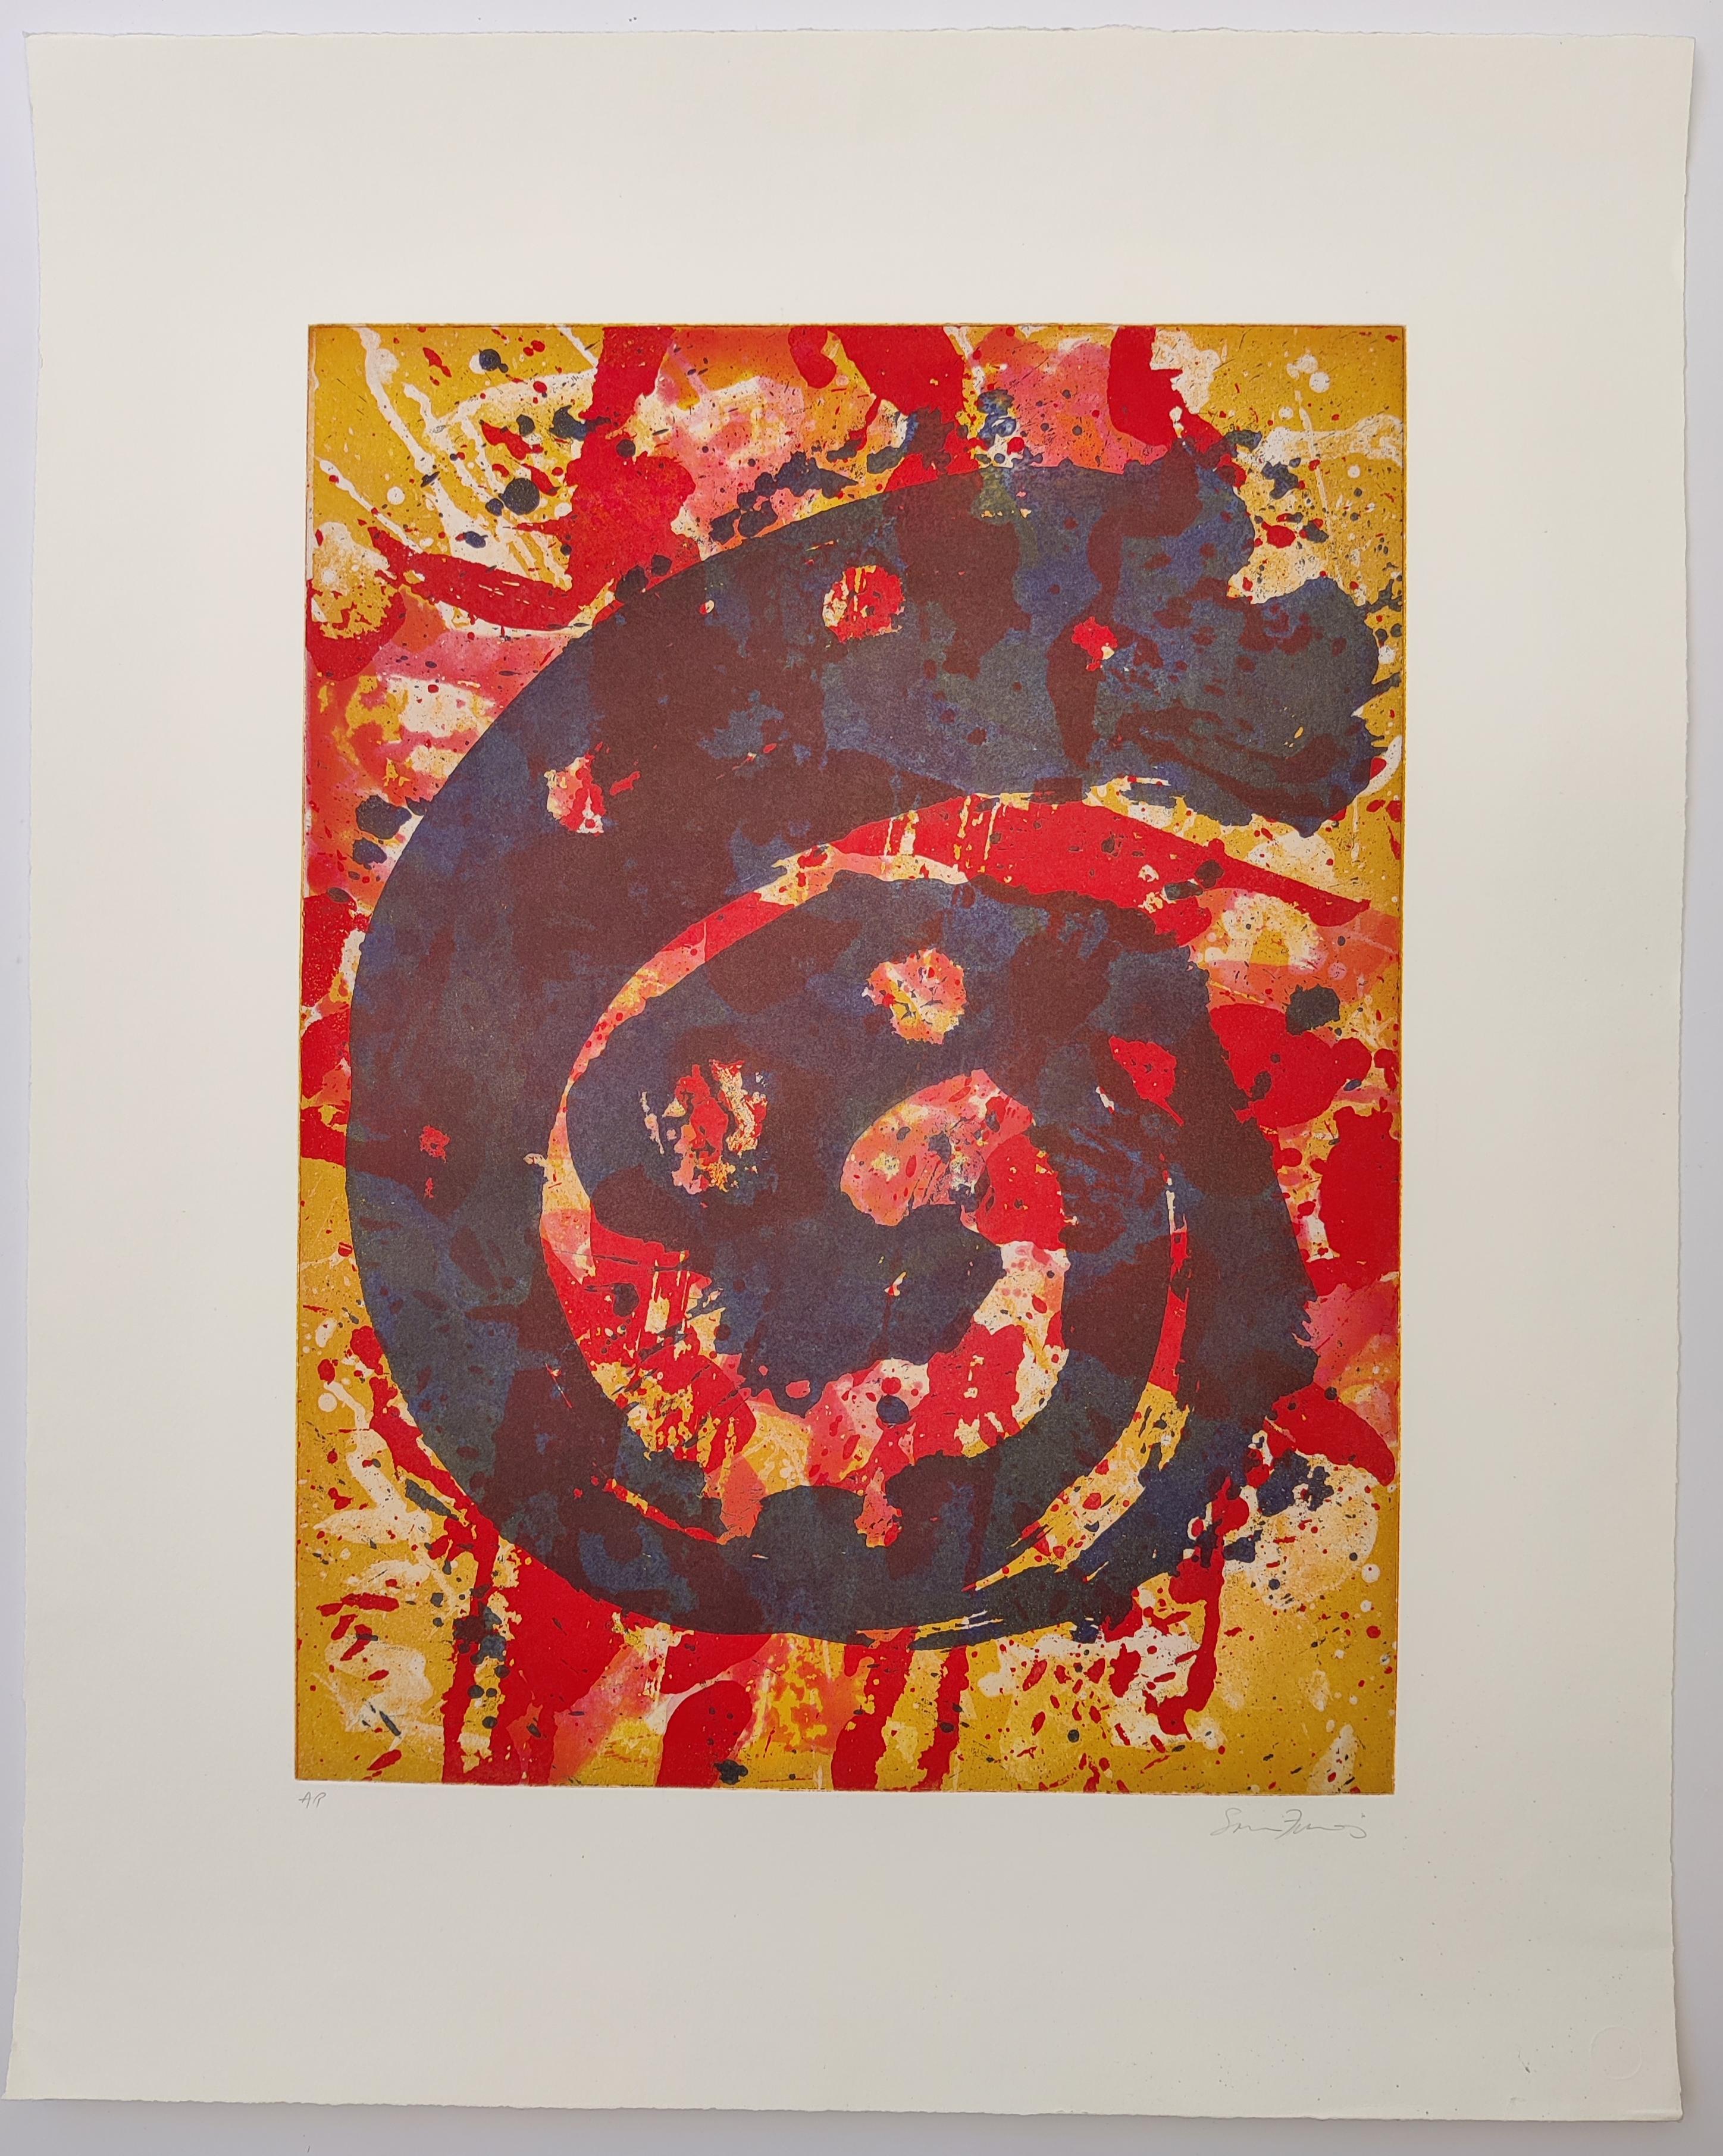 Sam Francis
Mehrfarbige Spirale, 1970
Signed in pencil
Edition A.P. (the edition was 40)
Image size: 60.4 x 45.3 cm
Sheet size: 85 x 68 cm
Published by The Litho Shop, Inc., California
Printed by Jacob Samuel at the Litho Shop, Inc.,